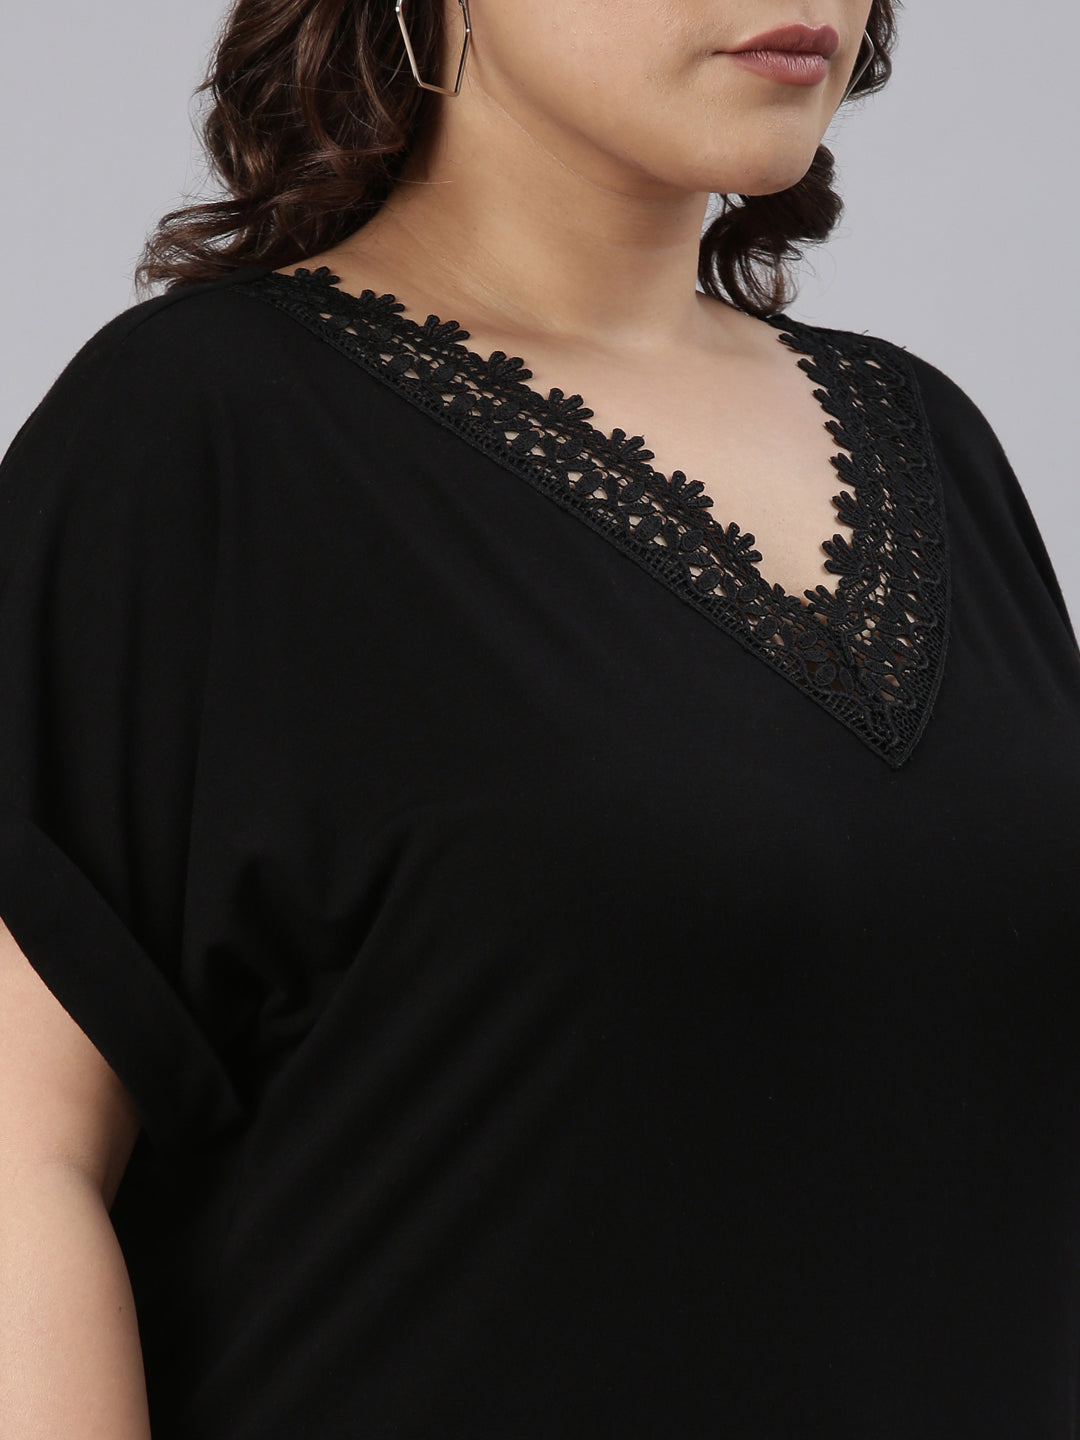 BLACK JERSEY LACE TOP